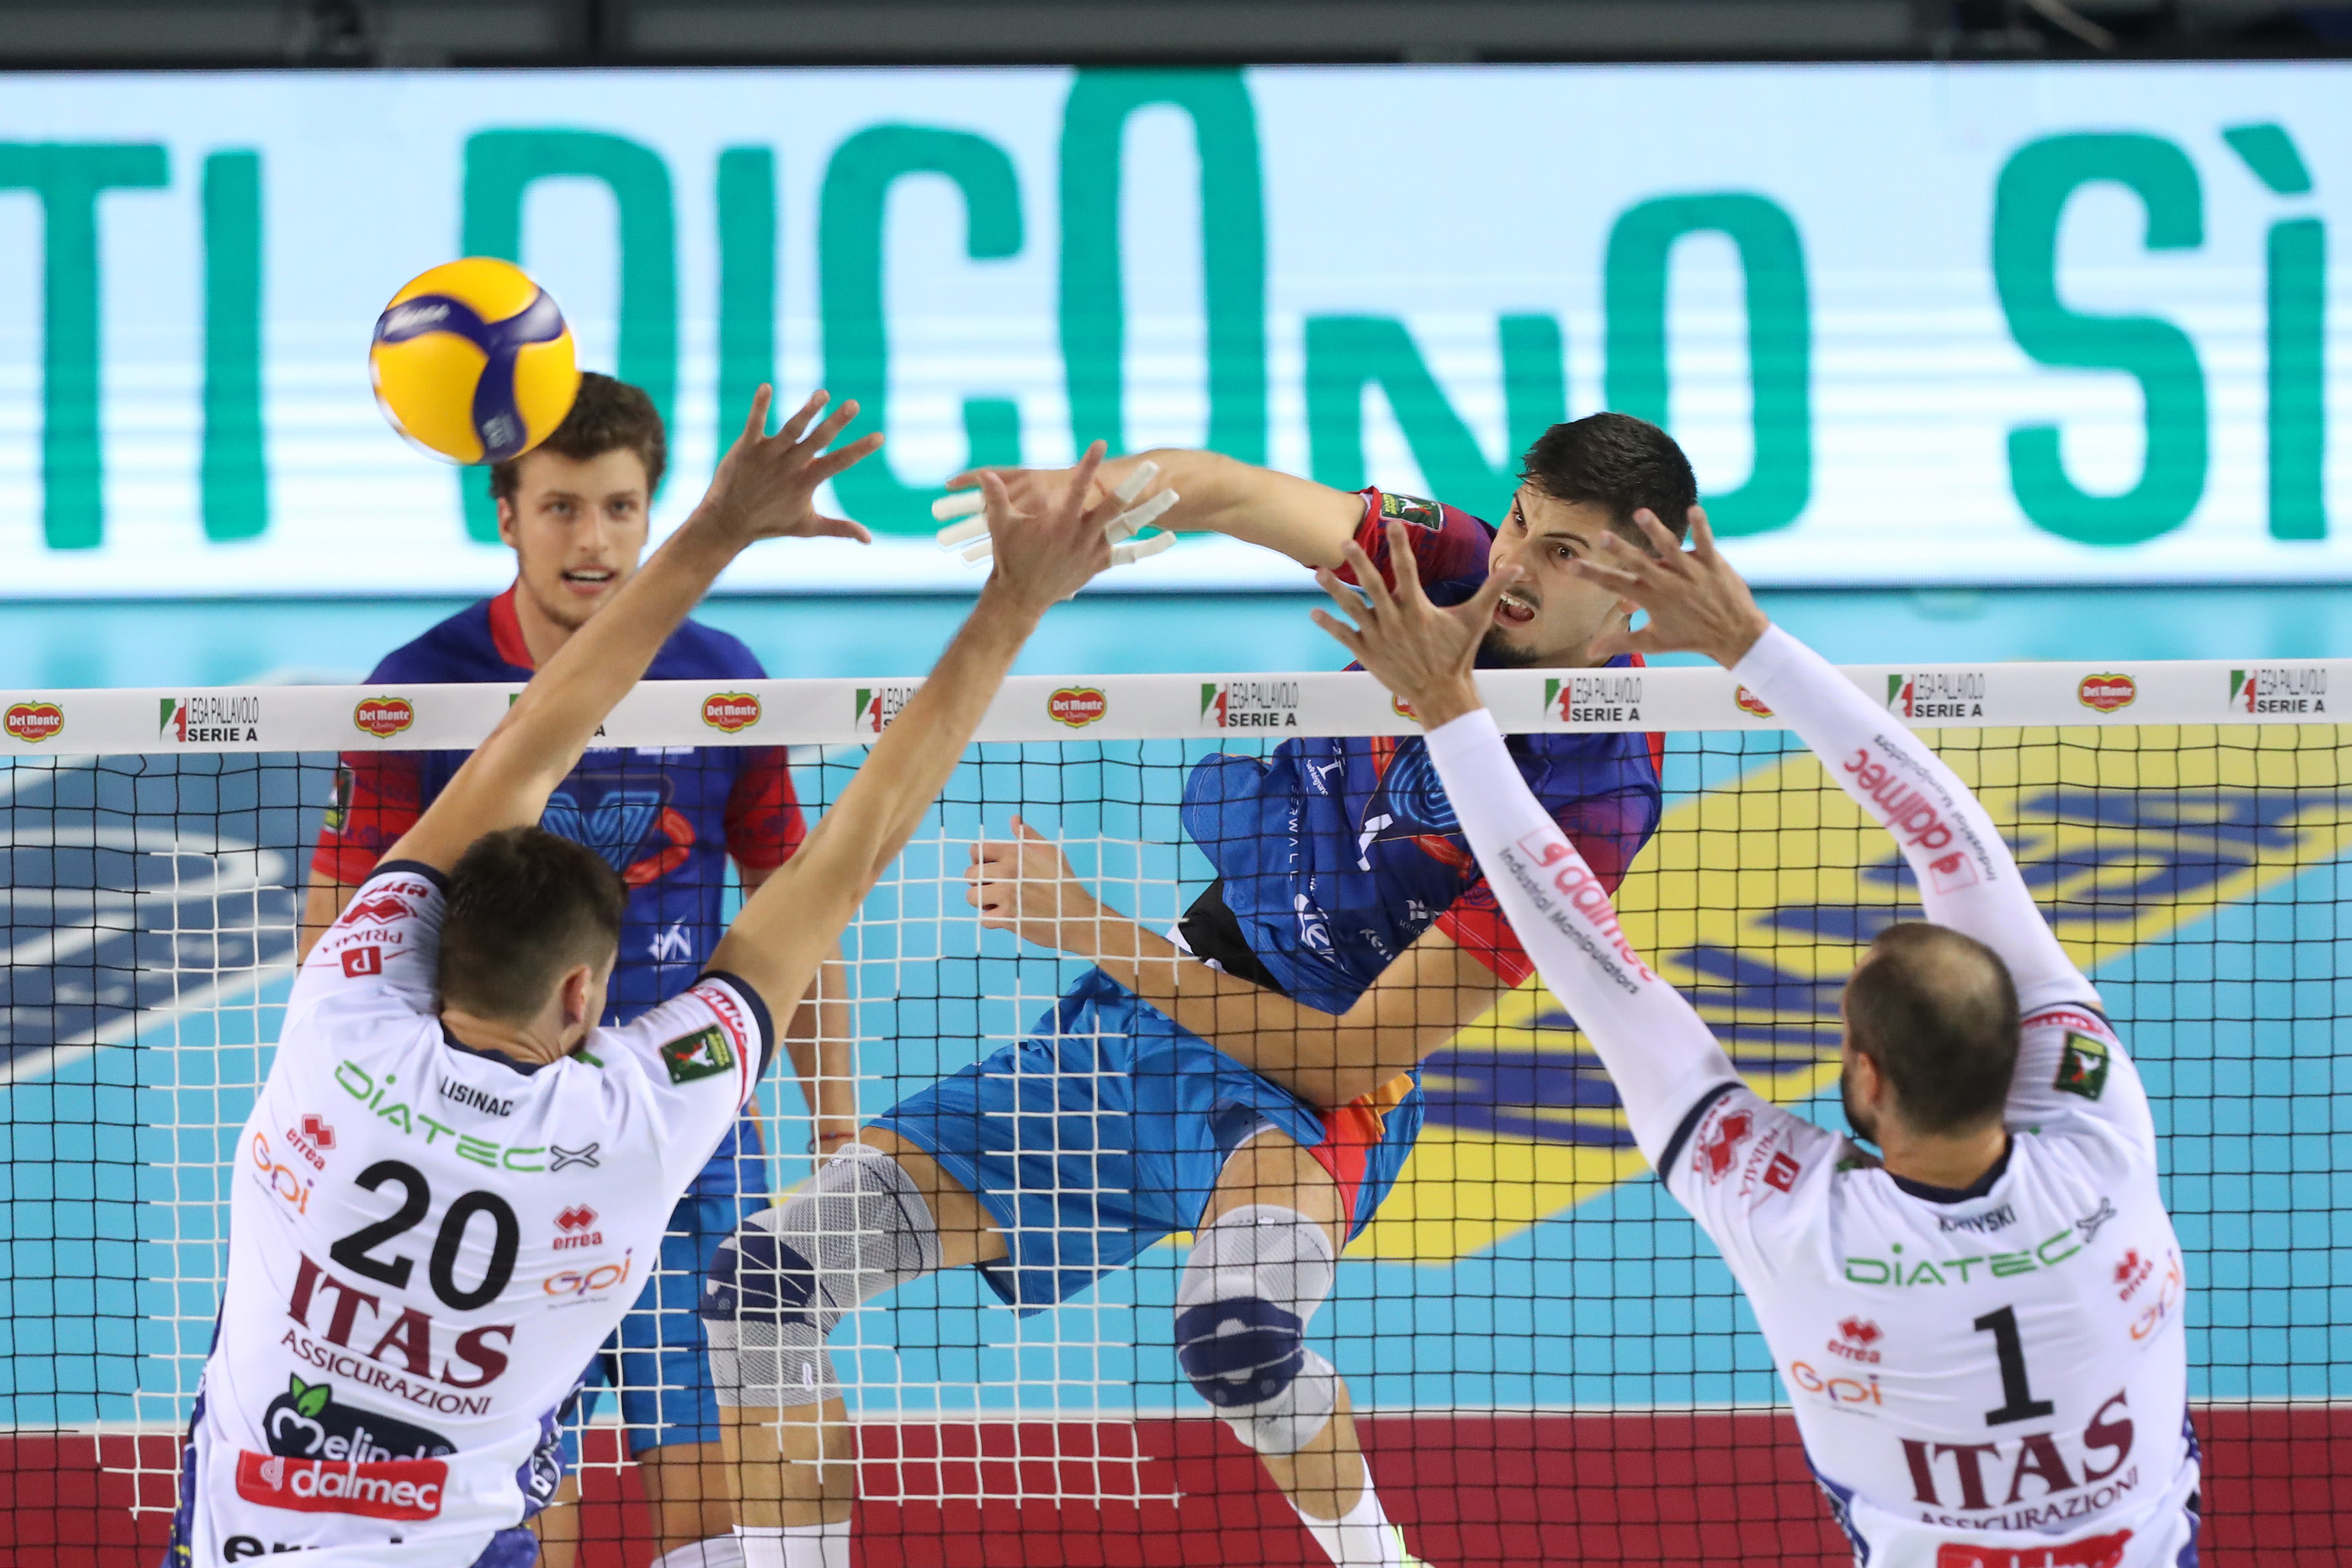 Itas Trentino to welcome Vero Volley Monza in remake of Supercoppa ...